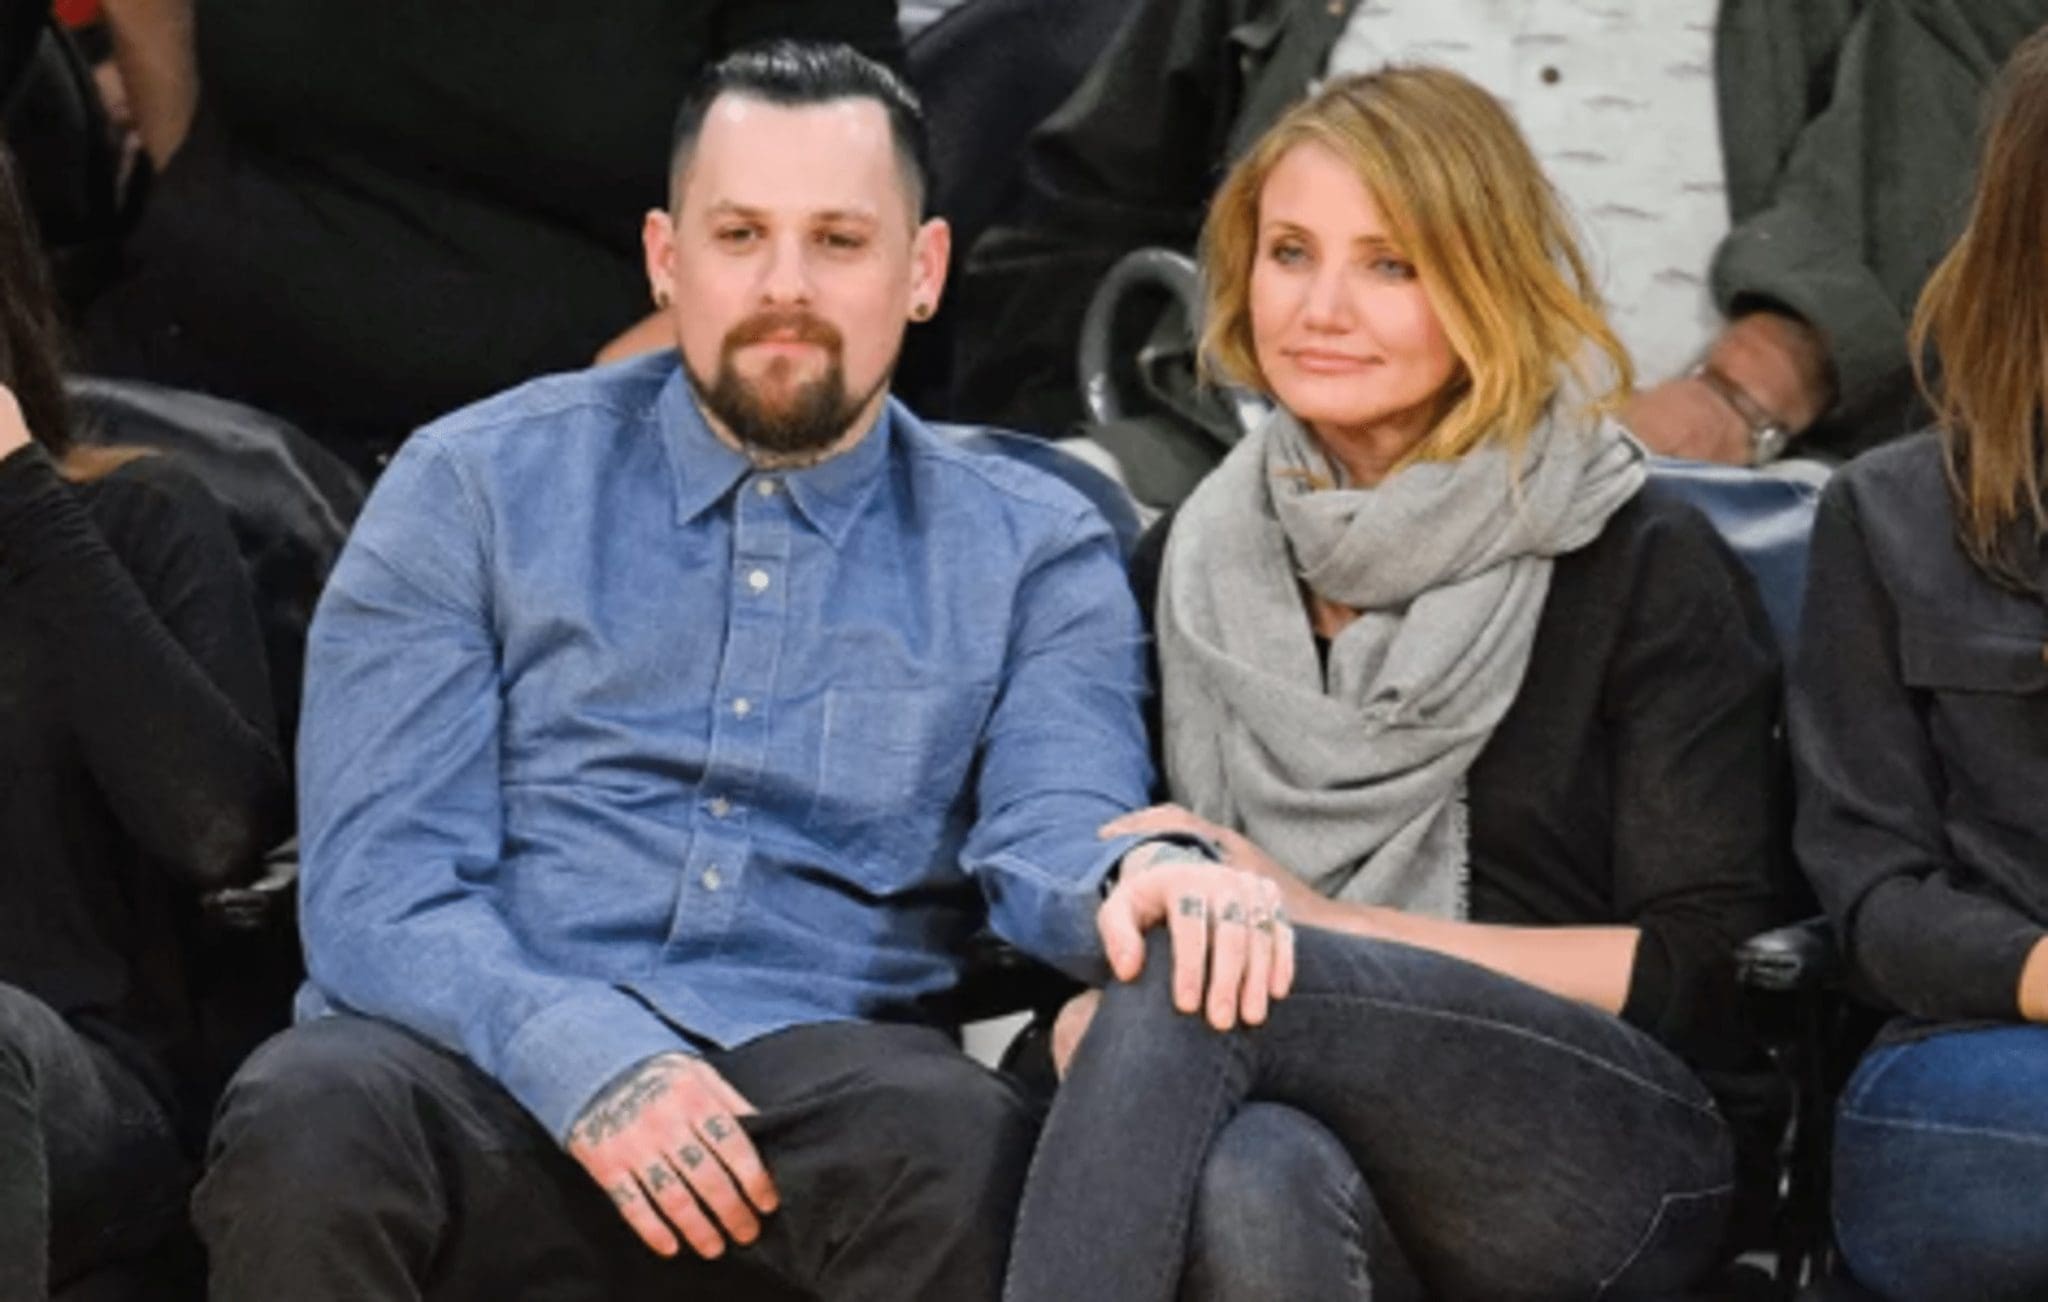 Cameron Diaz's Birthday Party, As Organized By Husband Benji Madden, Is Revealed